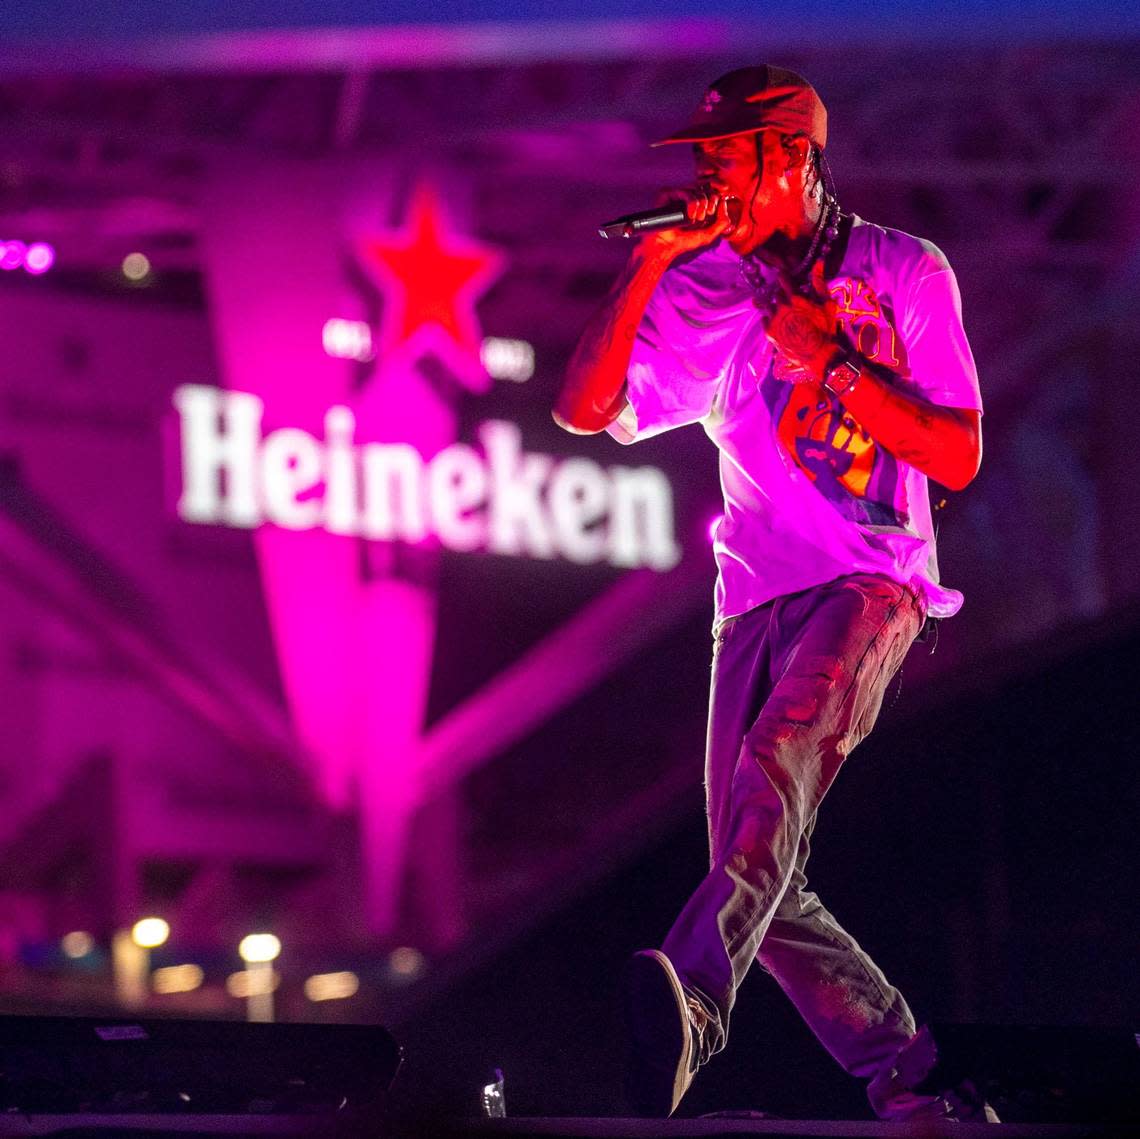 Rapper Travis Scott performs on the Ciroc main stage after being brought out as a suprise guest by fellow rapper Future during the second day of Rolling Loud Miami, an international hip-hop festival, at Hard Rock Stadium in Miami Gardens, Florida, on Saturday, July 23, 2022.